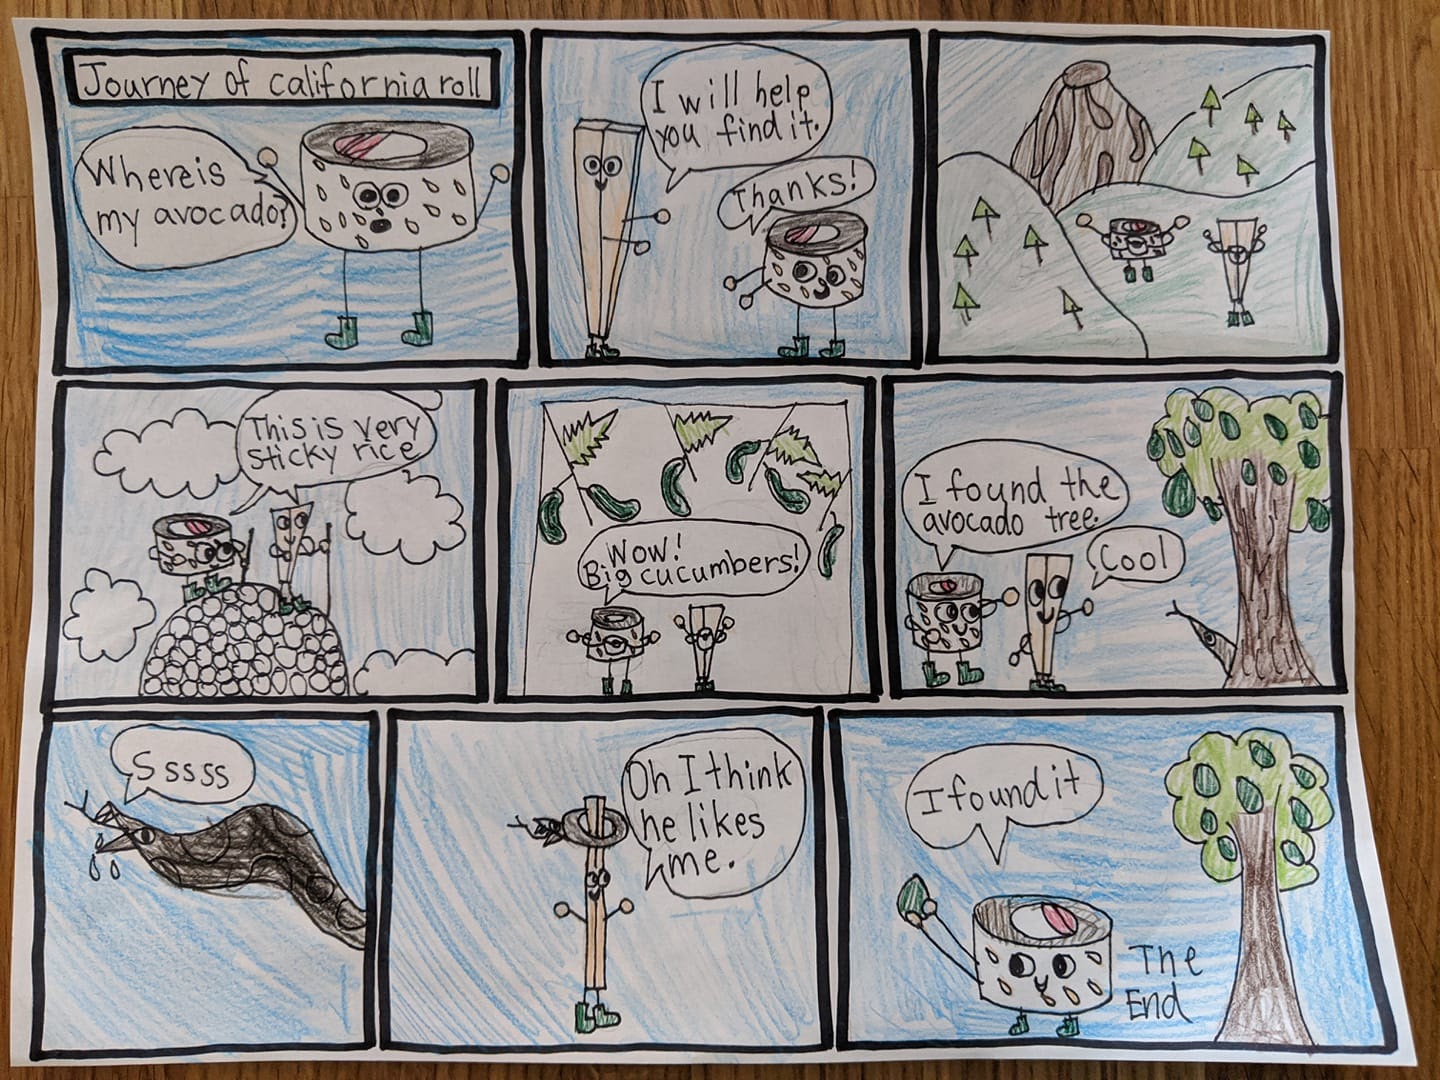 One-page comic entitled Journey of California roll